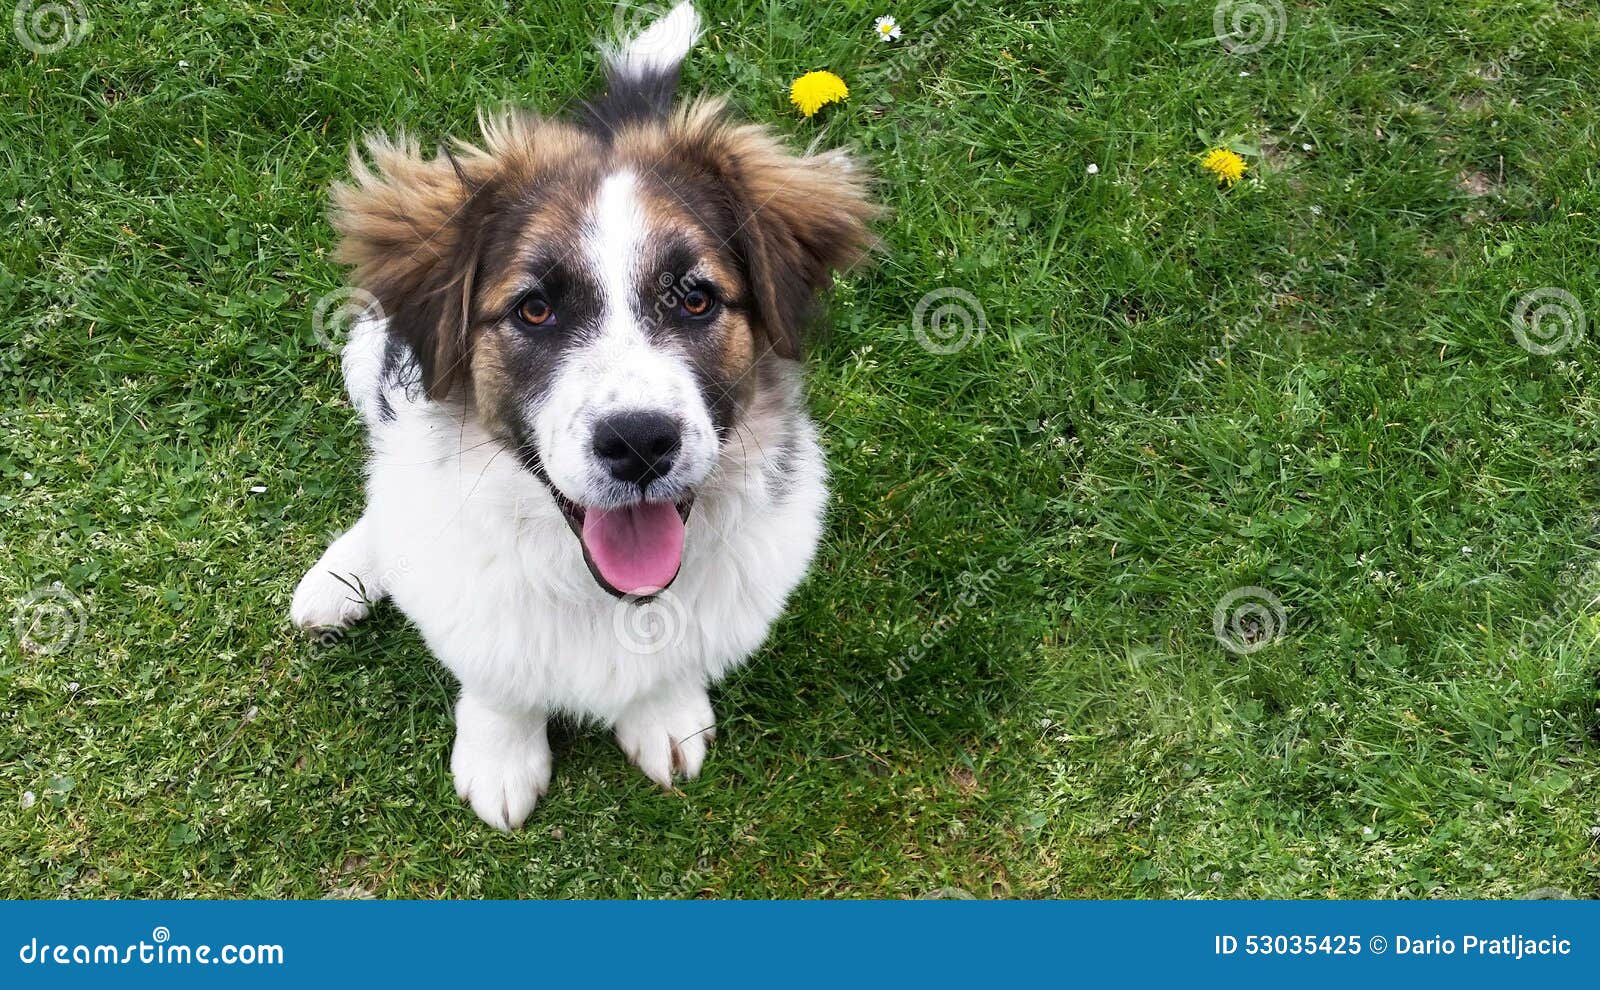 Dog On The Grass Stock Image Image Of Tornjak Breed 53035425